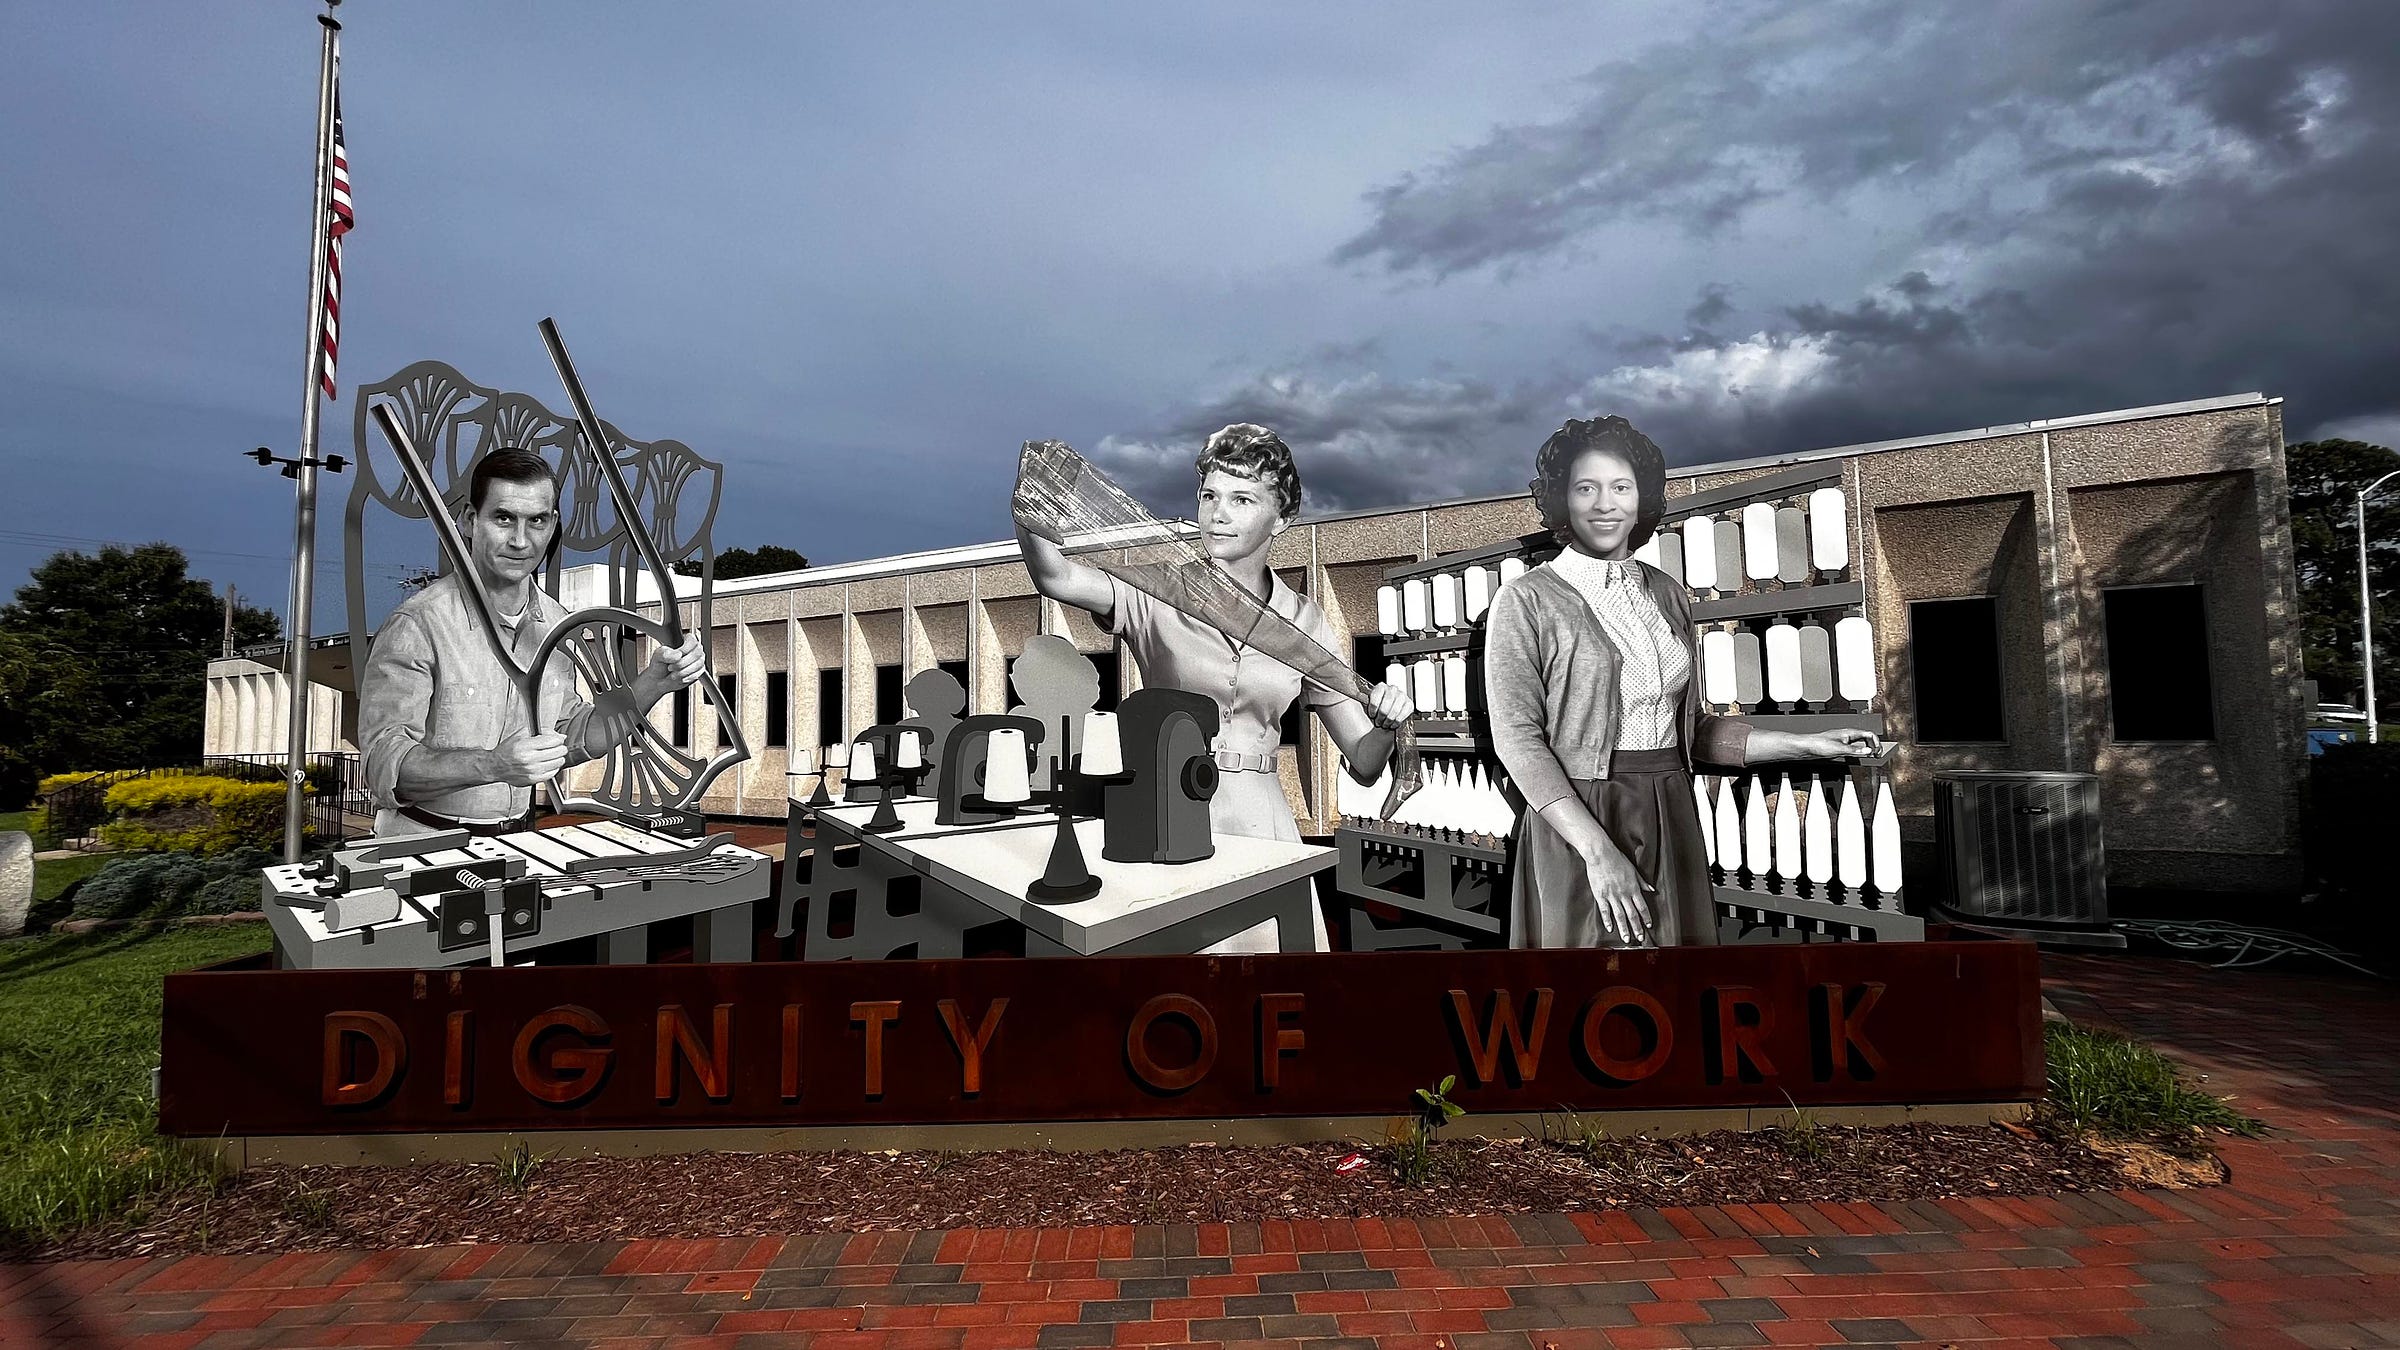 Image of the Dignity of Work Monument in Morganton, North Carolina, featuring Claude Moore, Mary Warlick, and Anne Ramsuer.